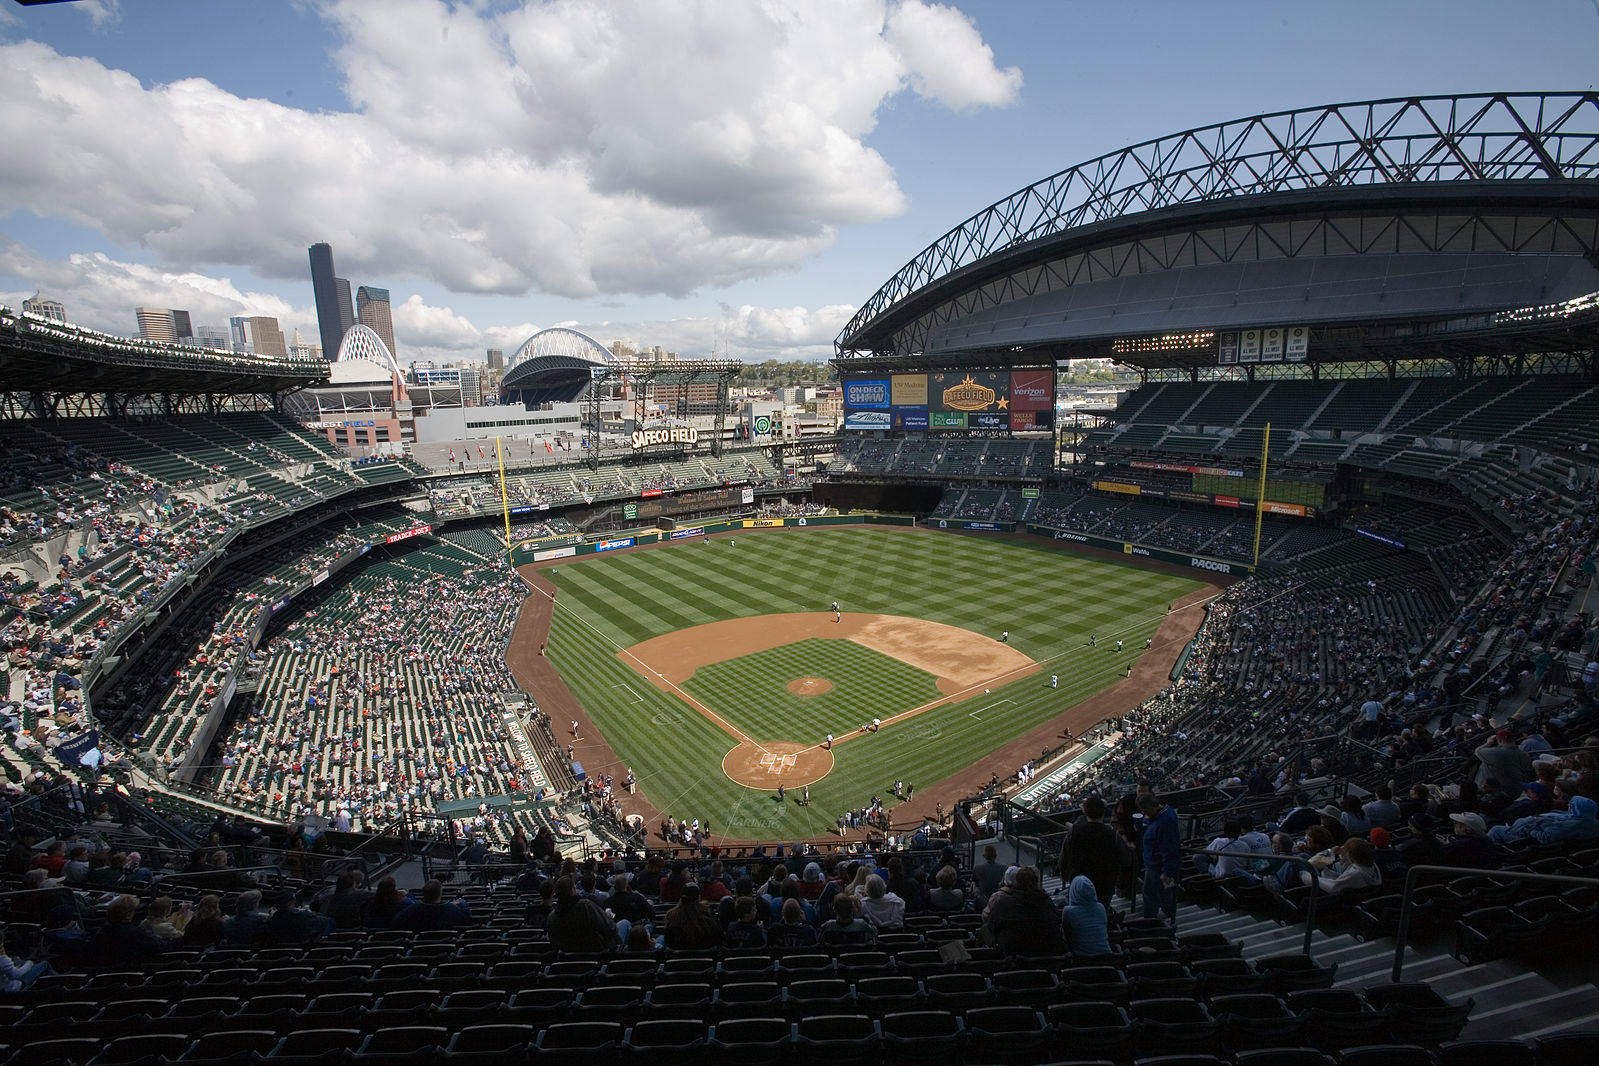 The amended ordinance will allocate $135 million in lodging tax revenues for Safeco Field upkeep over the next two decades. Photo by Cacophony/Wikipedia Commons